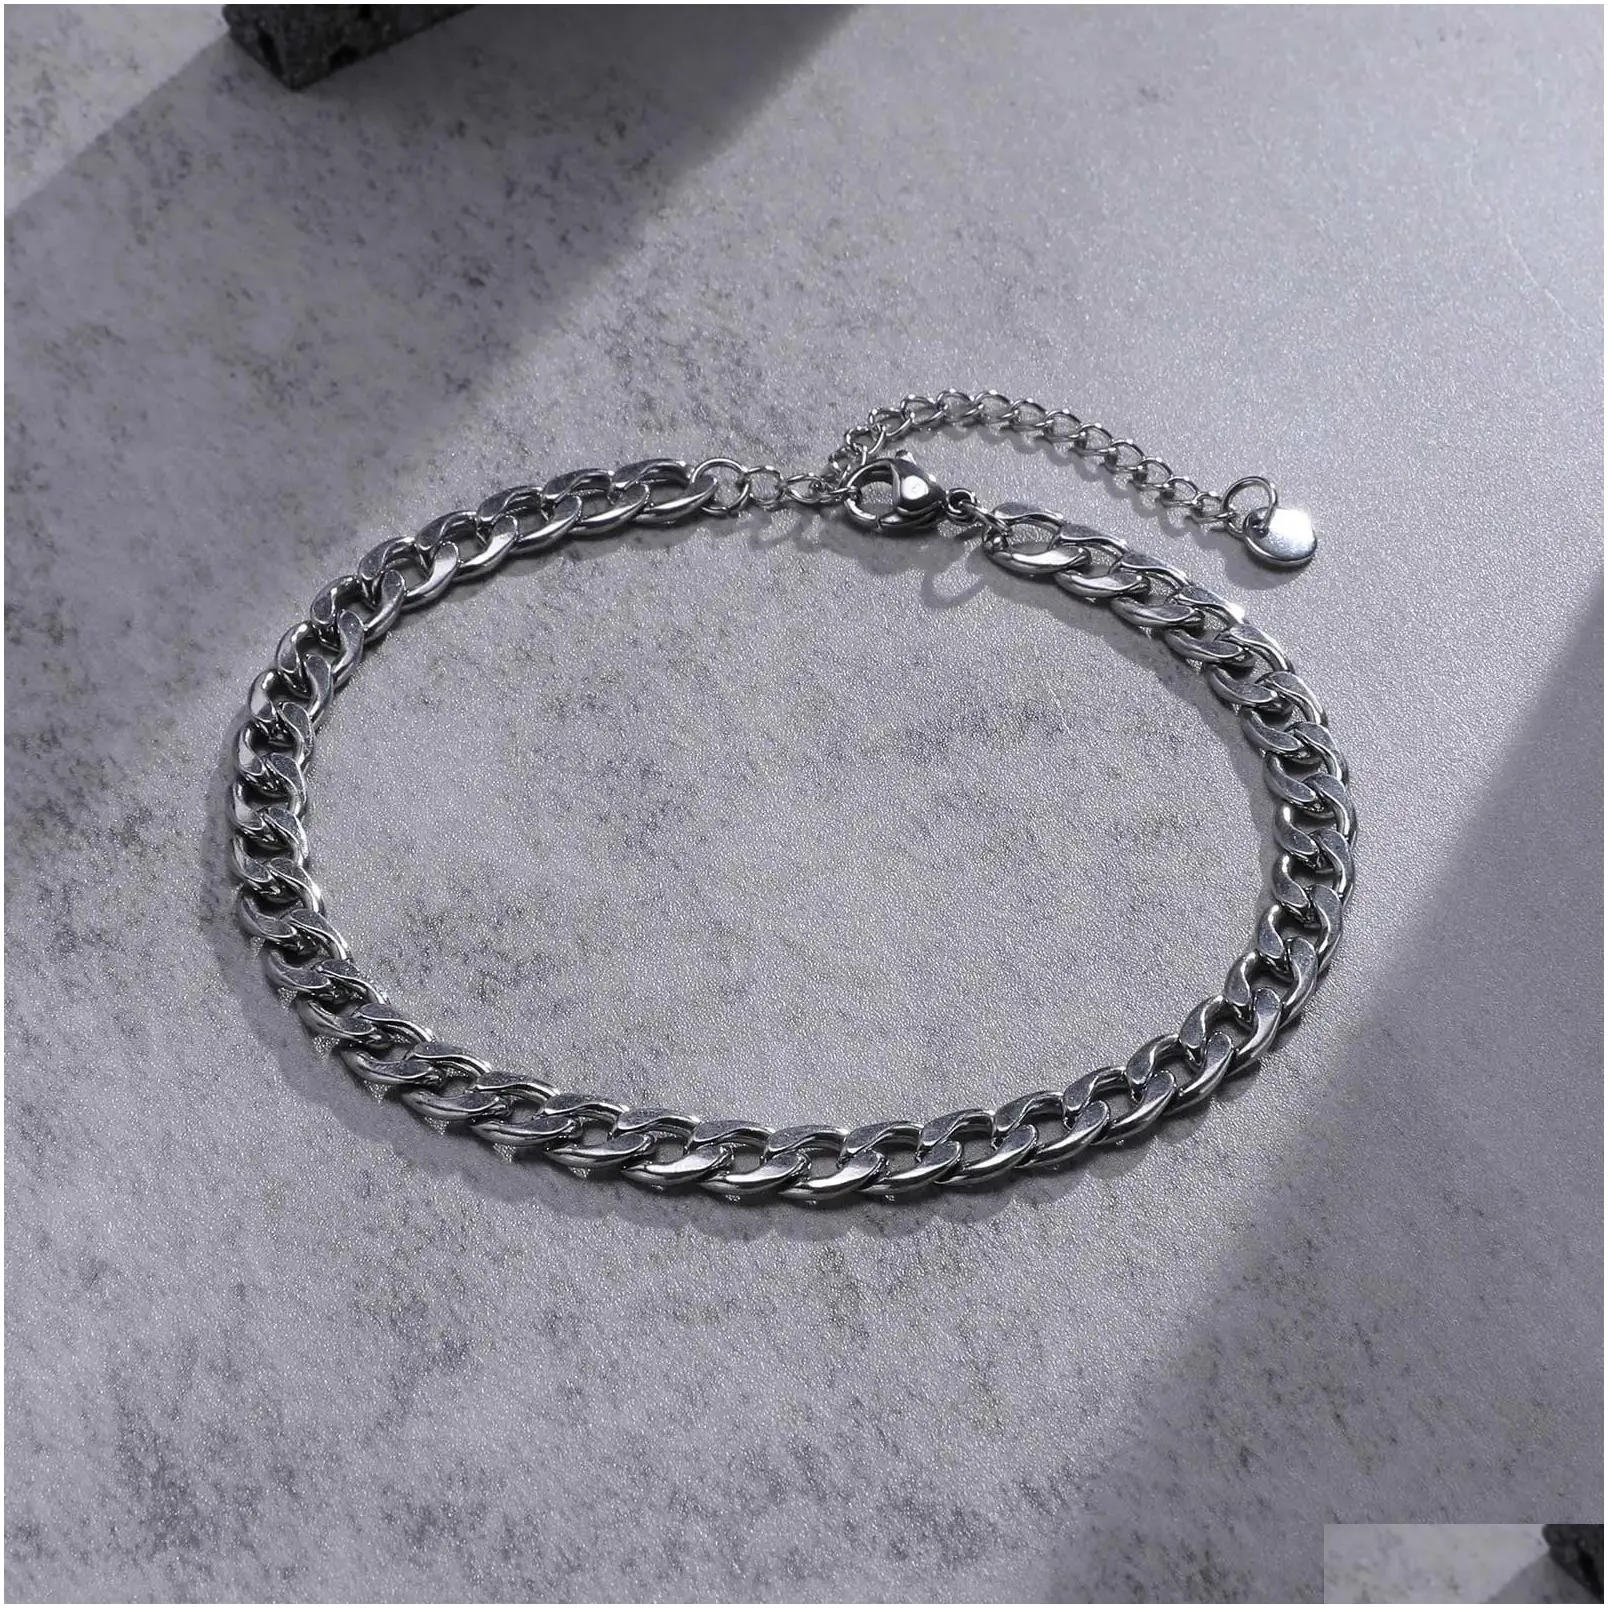 Waterproof 14K White Gold Cuban Wheat Chain Anklet Bracelets for Men, Summer Holiday Beach Foot Gifts Jewelry,Length Adjustable